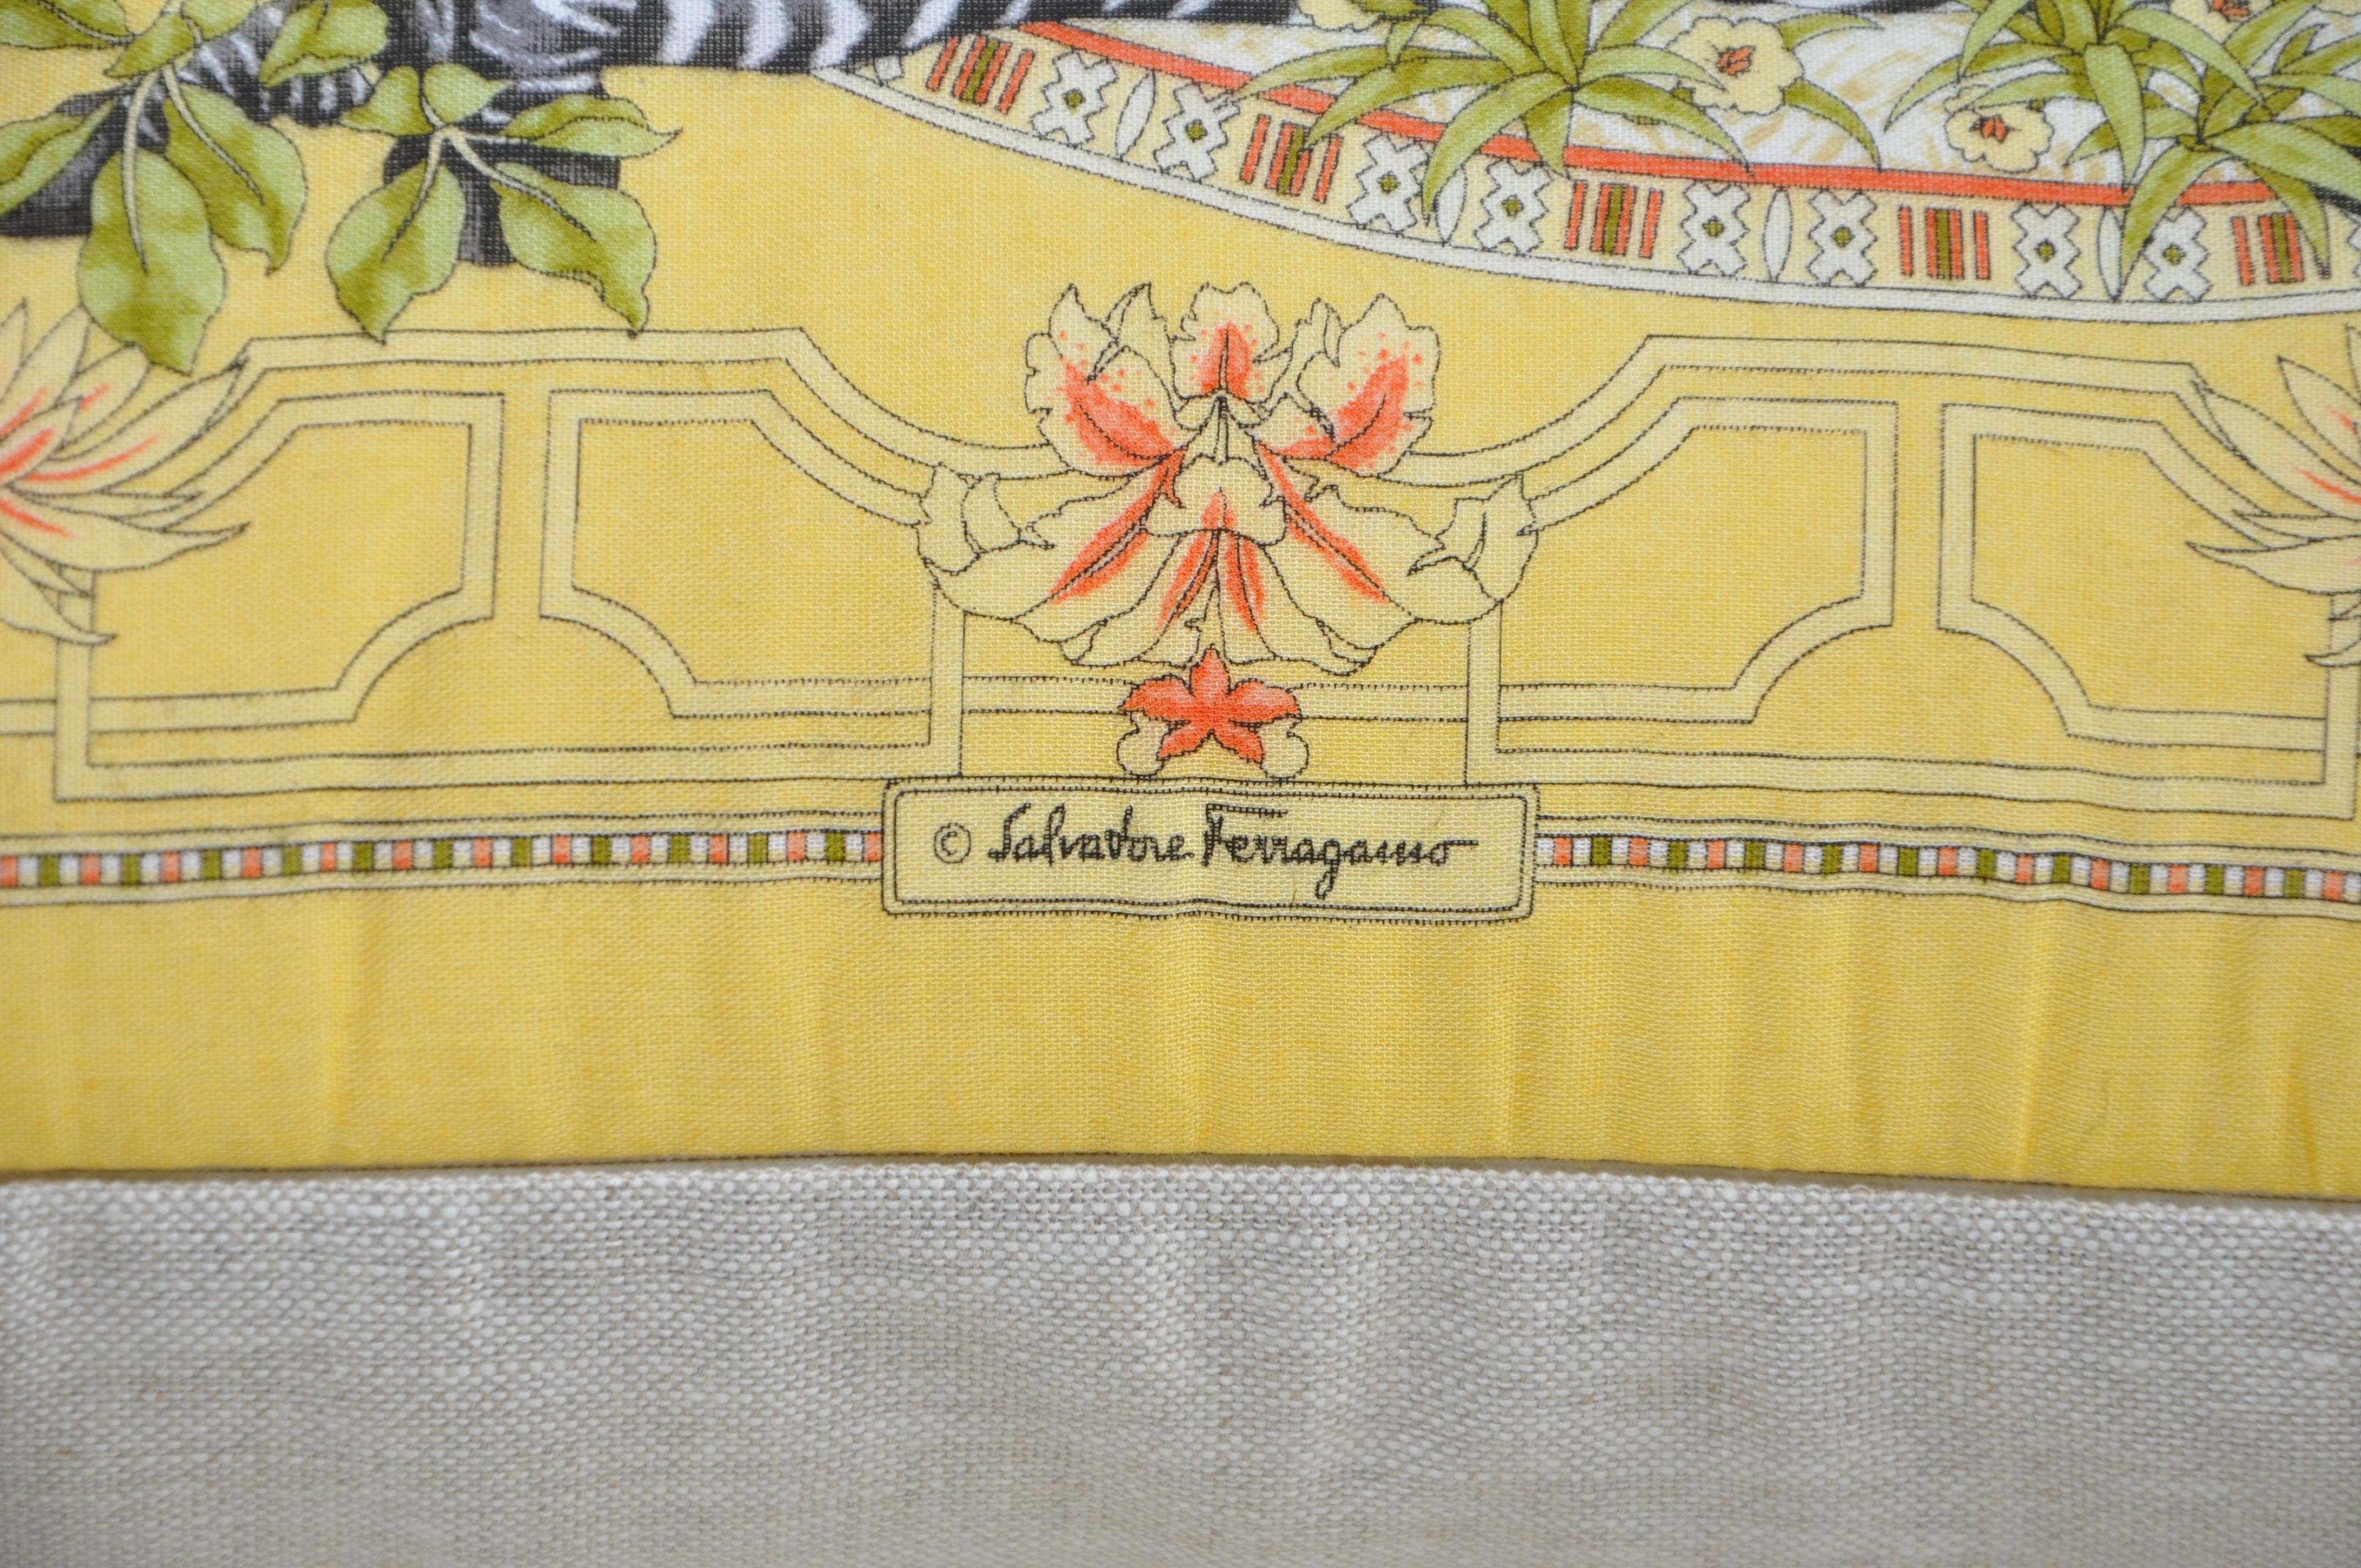 Title:
Rare vintage Salvatore Ferragamo scarf backed in pure Irish Linen cushion yellow gold peach green


This gem is a one-of-a-kind custom made luxury cushion (pillow) from an exquisite and rare vintage Salvatore Ferragamo fashion scarf in an